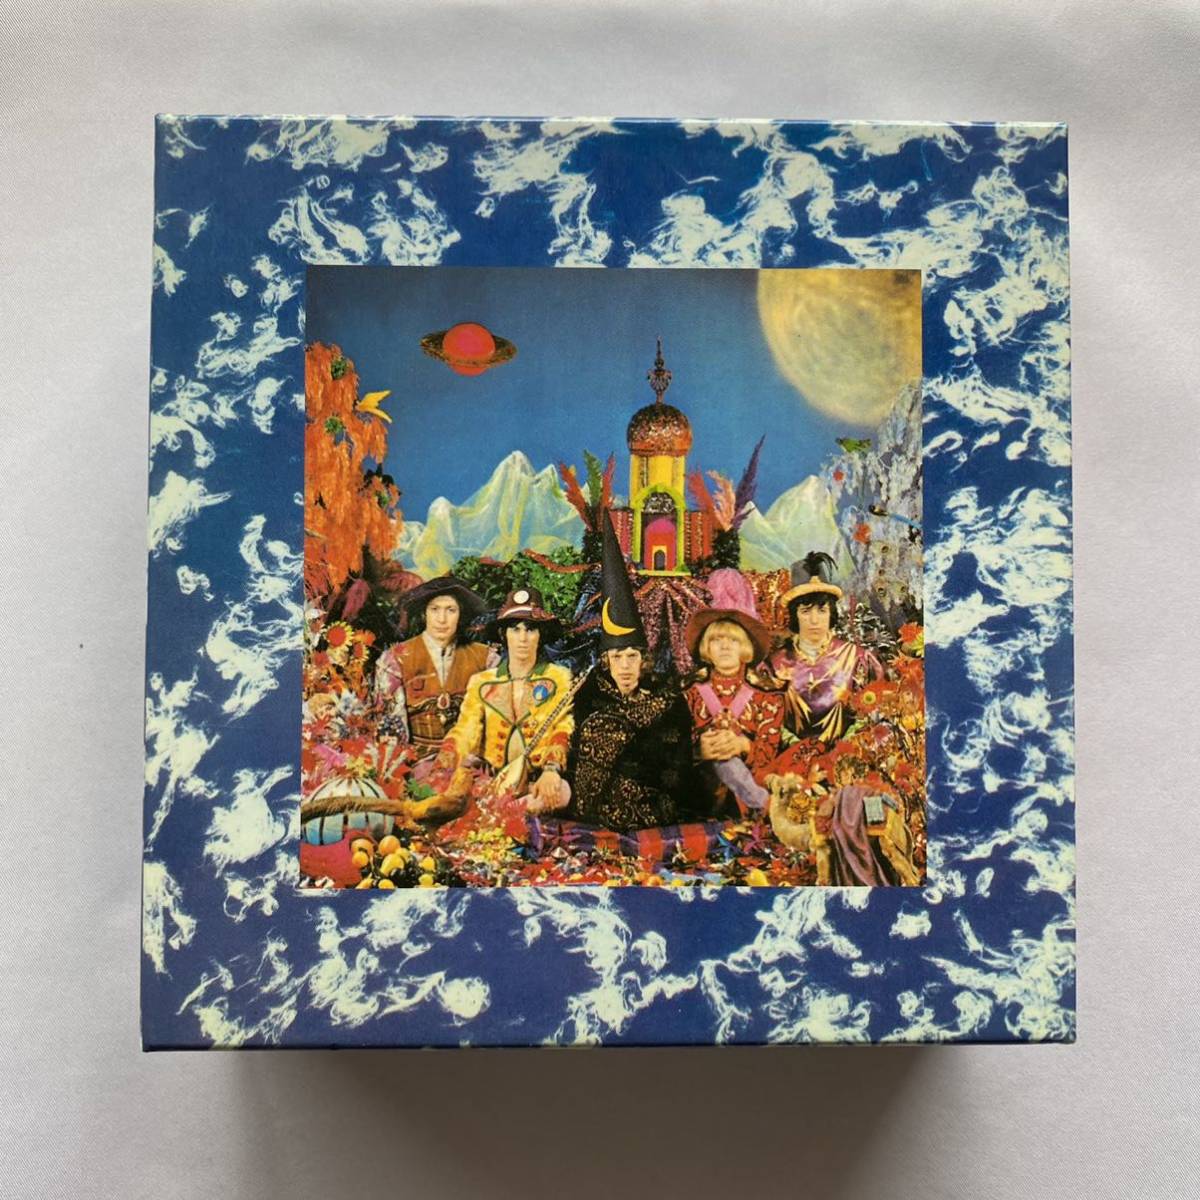 THE ROLLING STONES in the 60's papersleeve collection:ザ・ローリング・ストーンズ 60年代アルバム 紙ジャケ8タイトル 非売品BOX入り_画像1